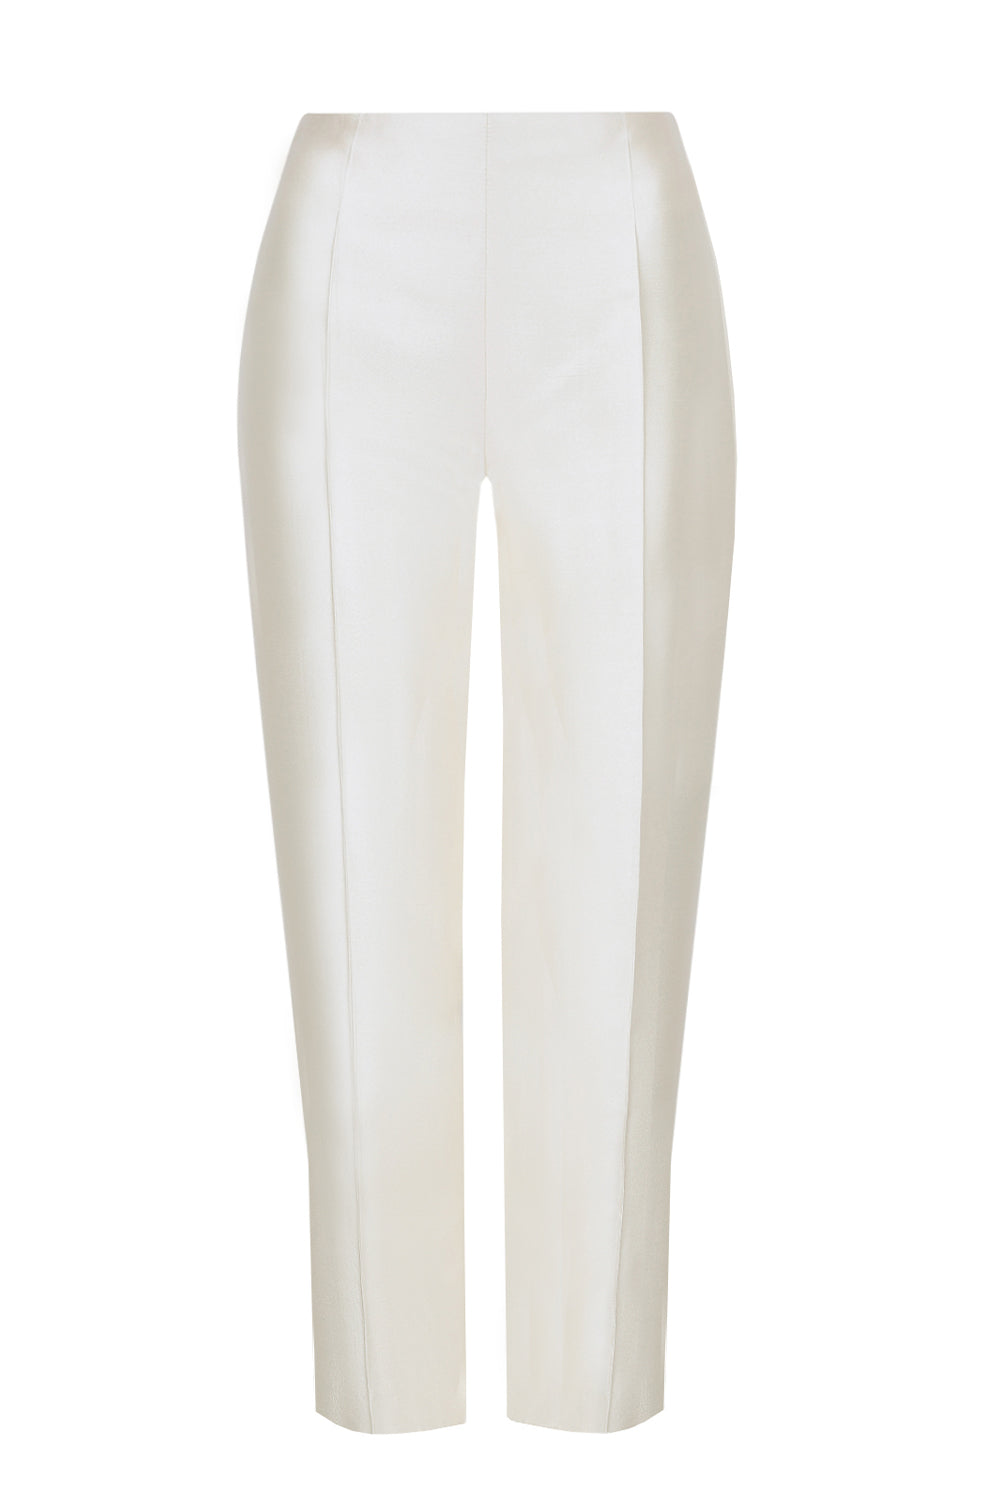 Ivory Sateen Trousers - Phoebe